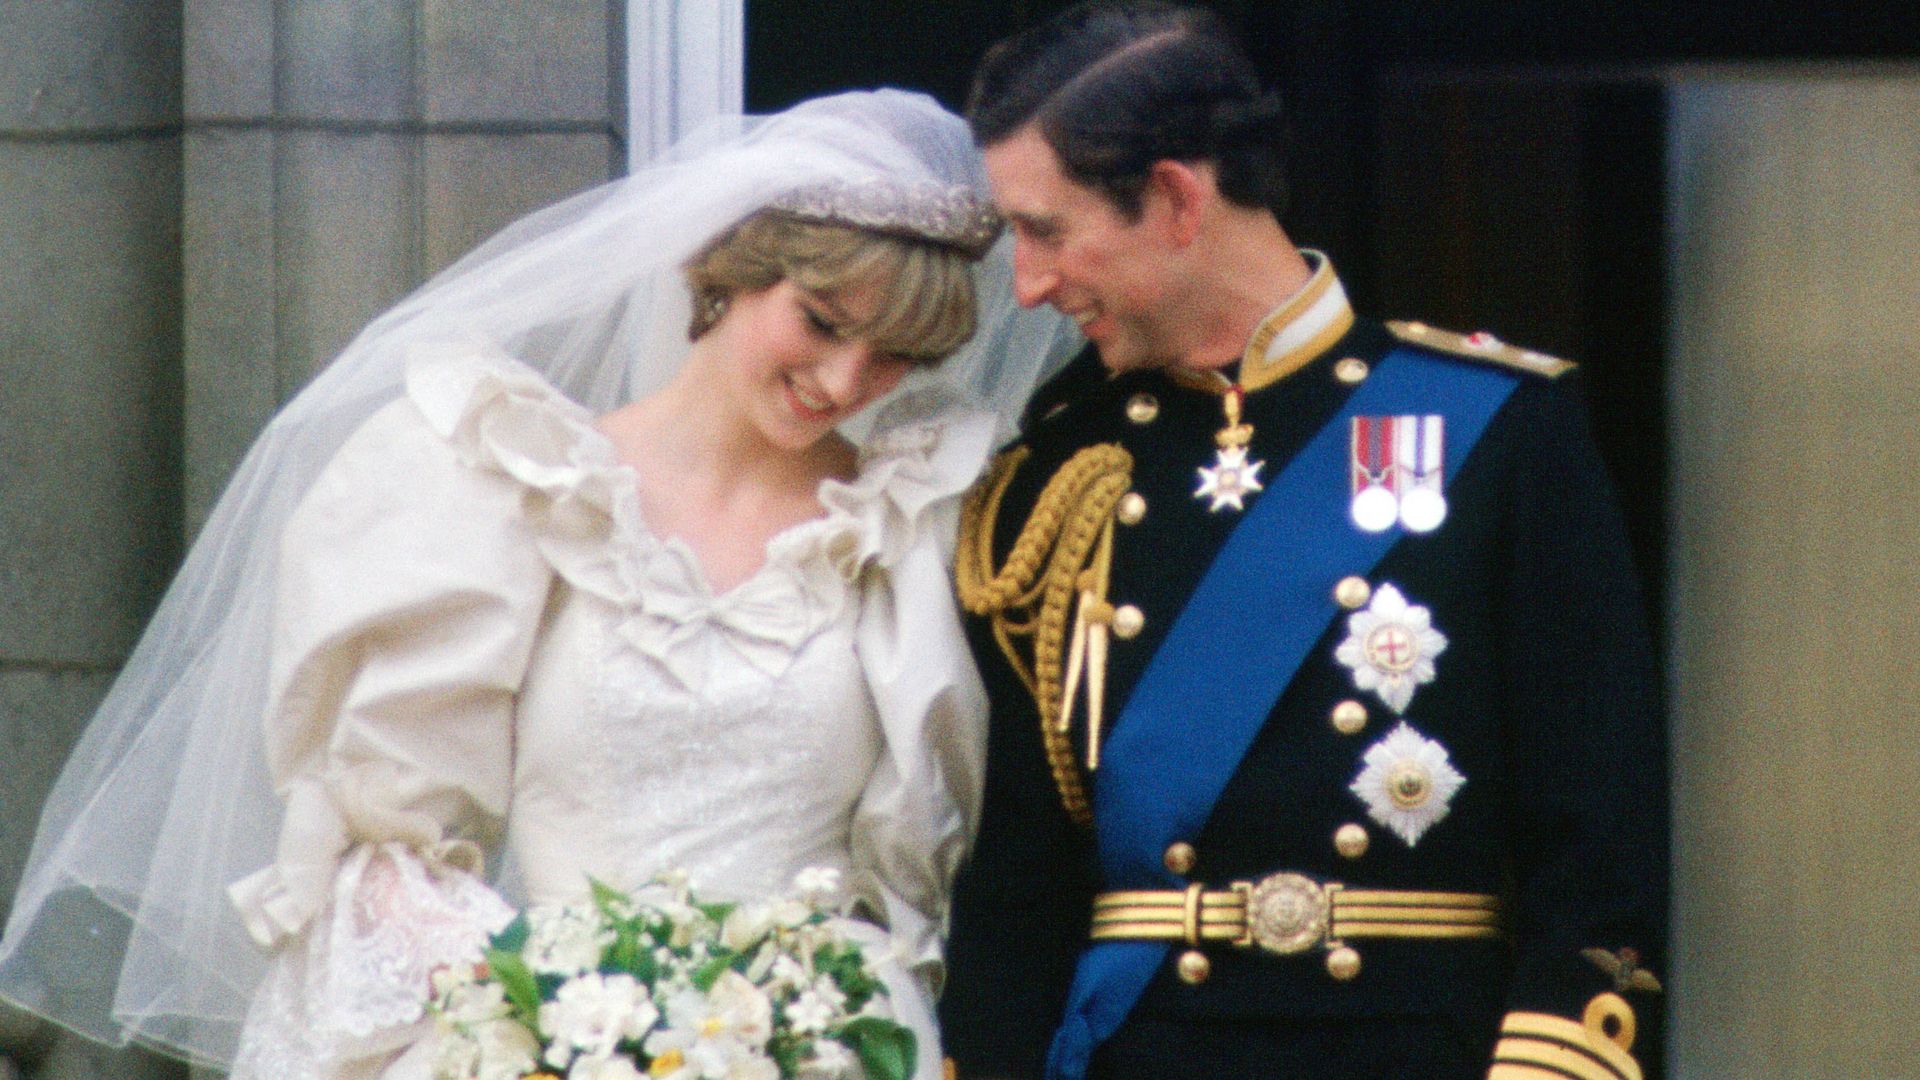 Prince Charles whispering to Diana on their wedding day on the balcony of Buckingham Palace